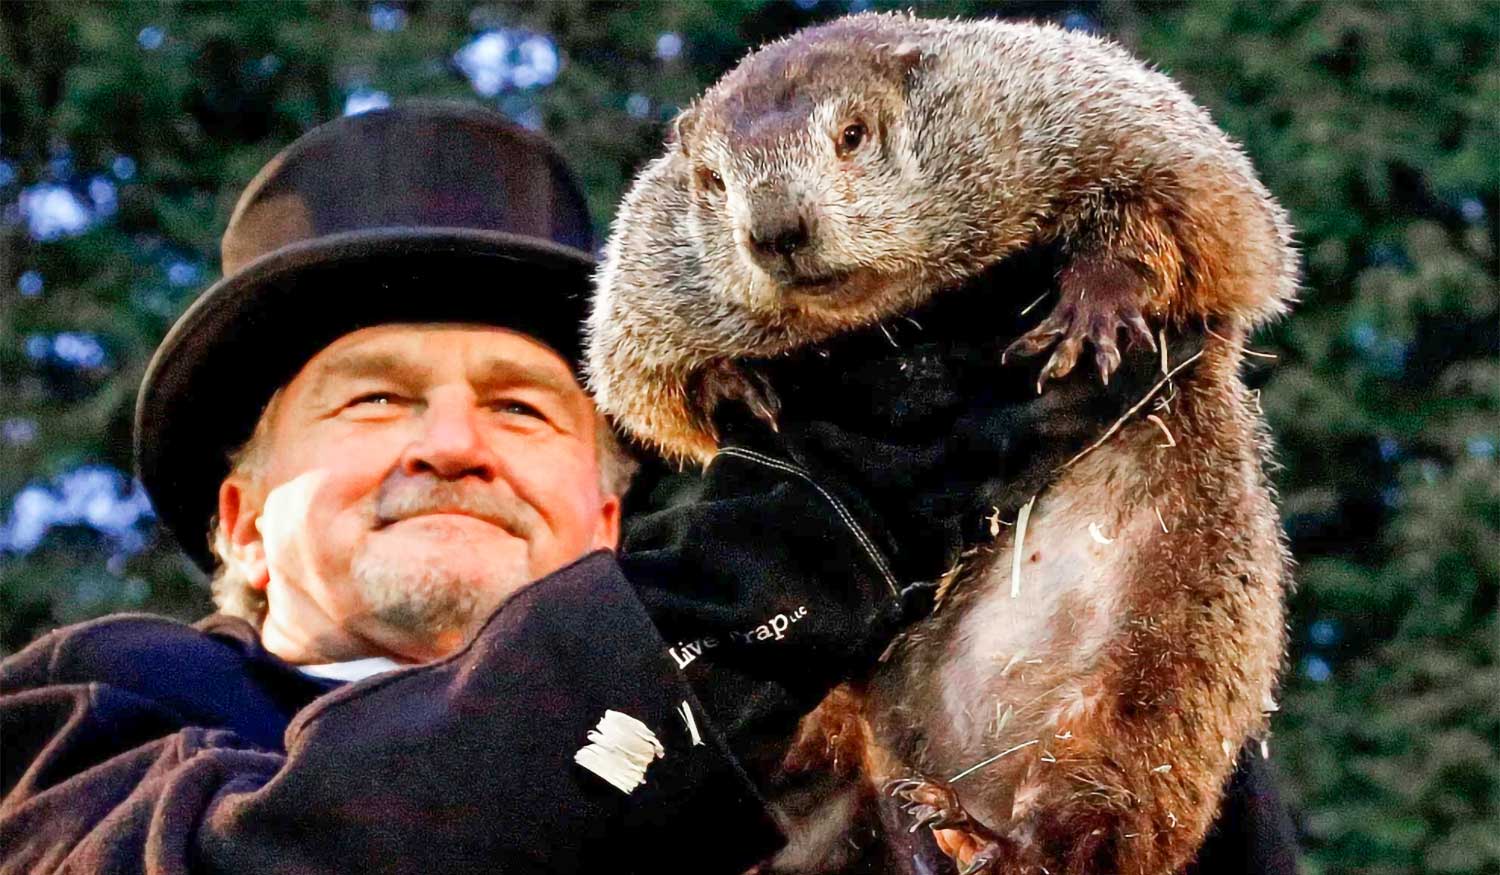 Groundhog Day is a sort of "tongue in cheek" celebration for the coming of spring, where the groundhog does - or doesn't - "see his shadow". So what is so important about a shadow? Read on.